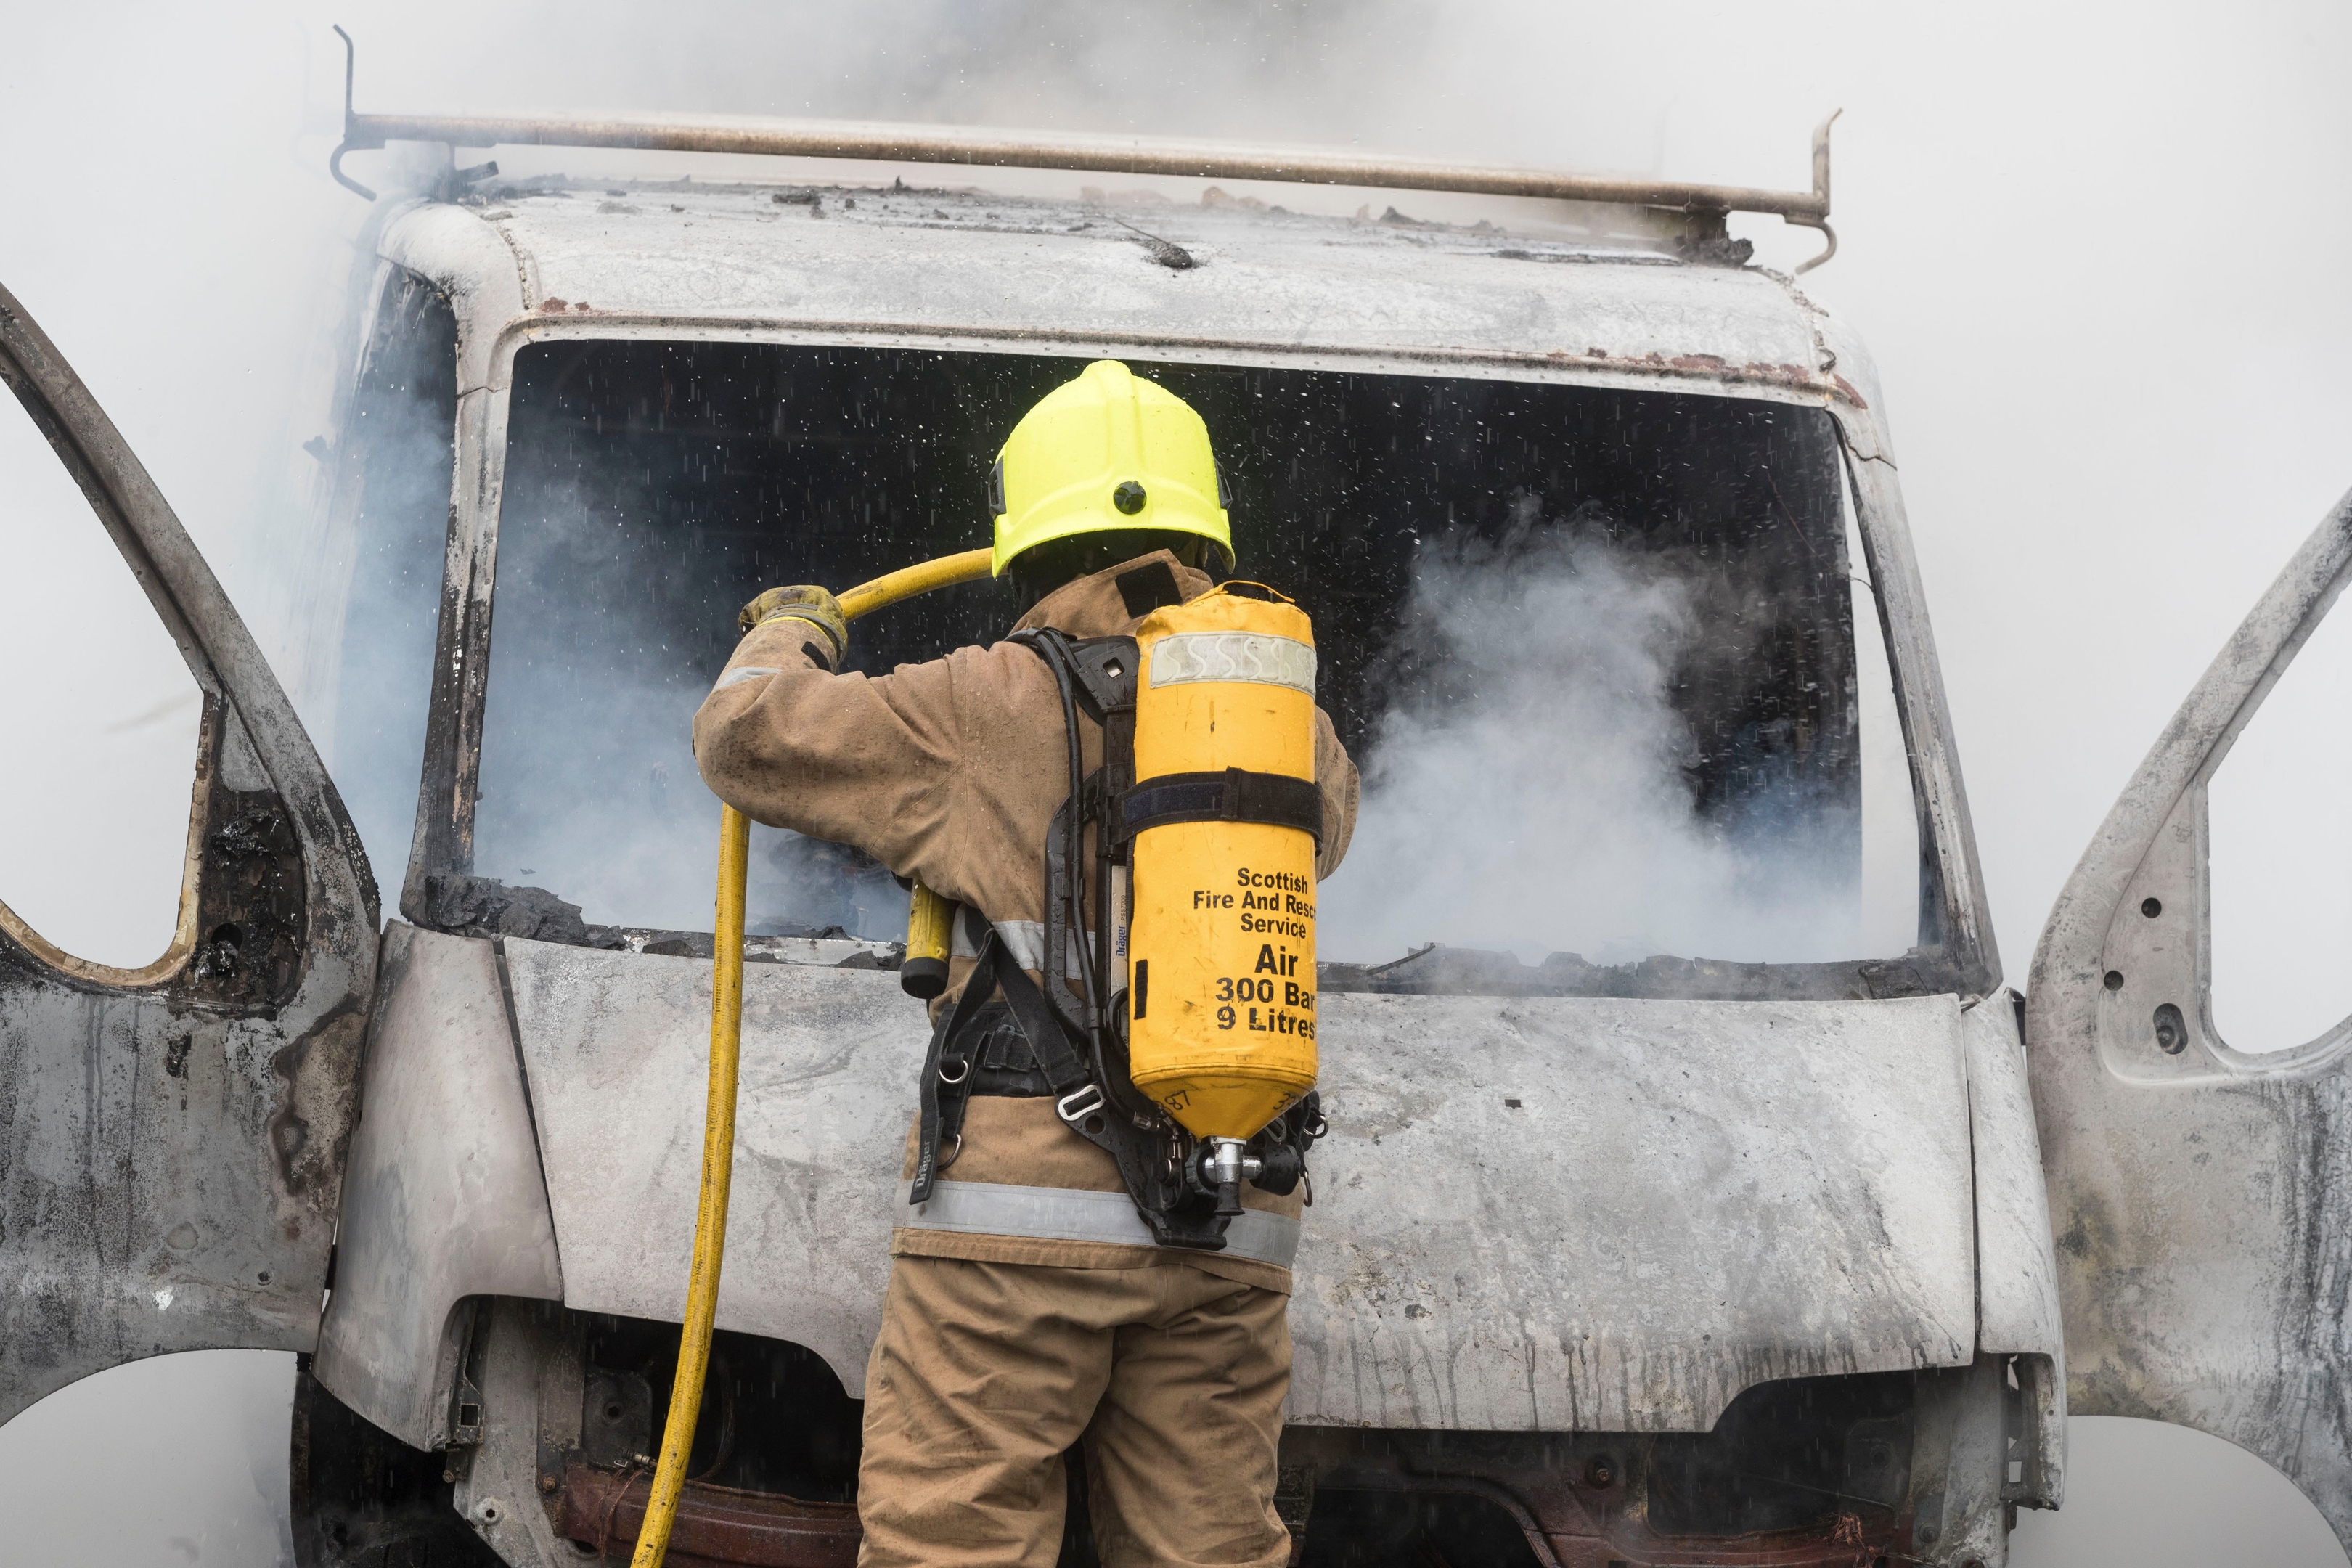 Firefighters put out the van blaze